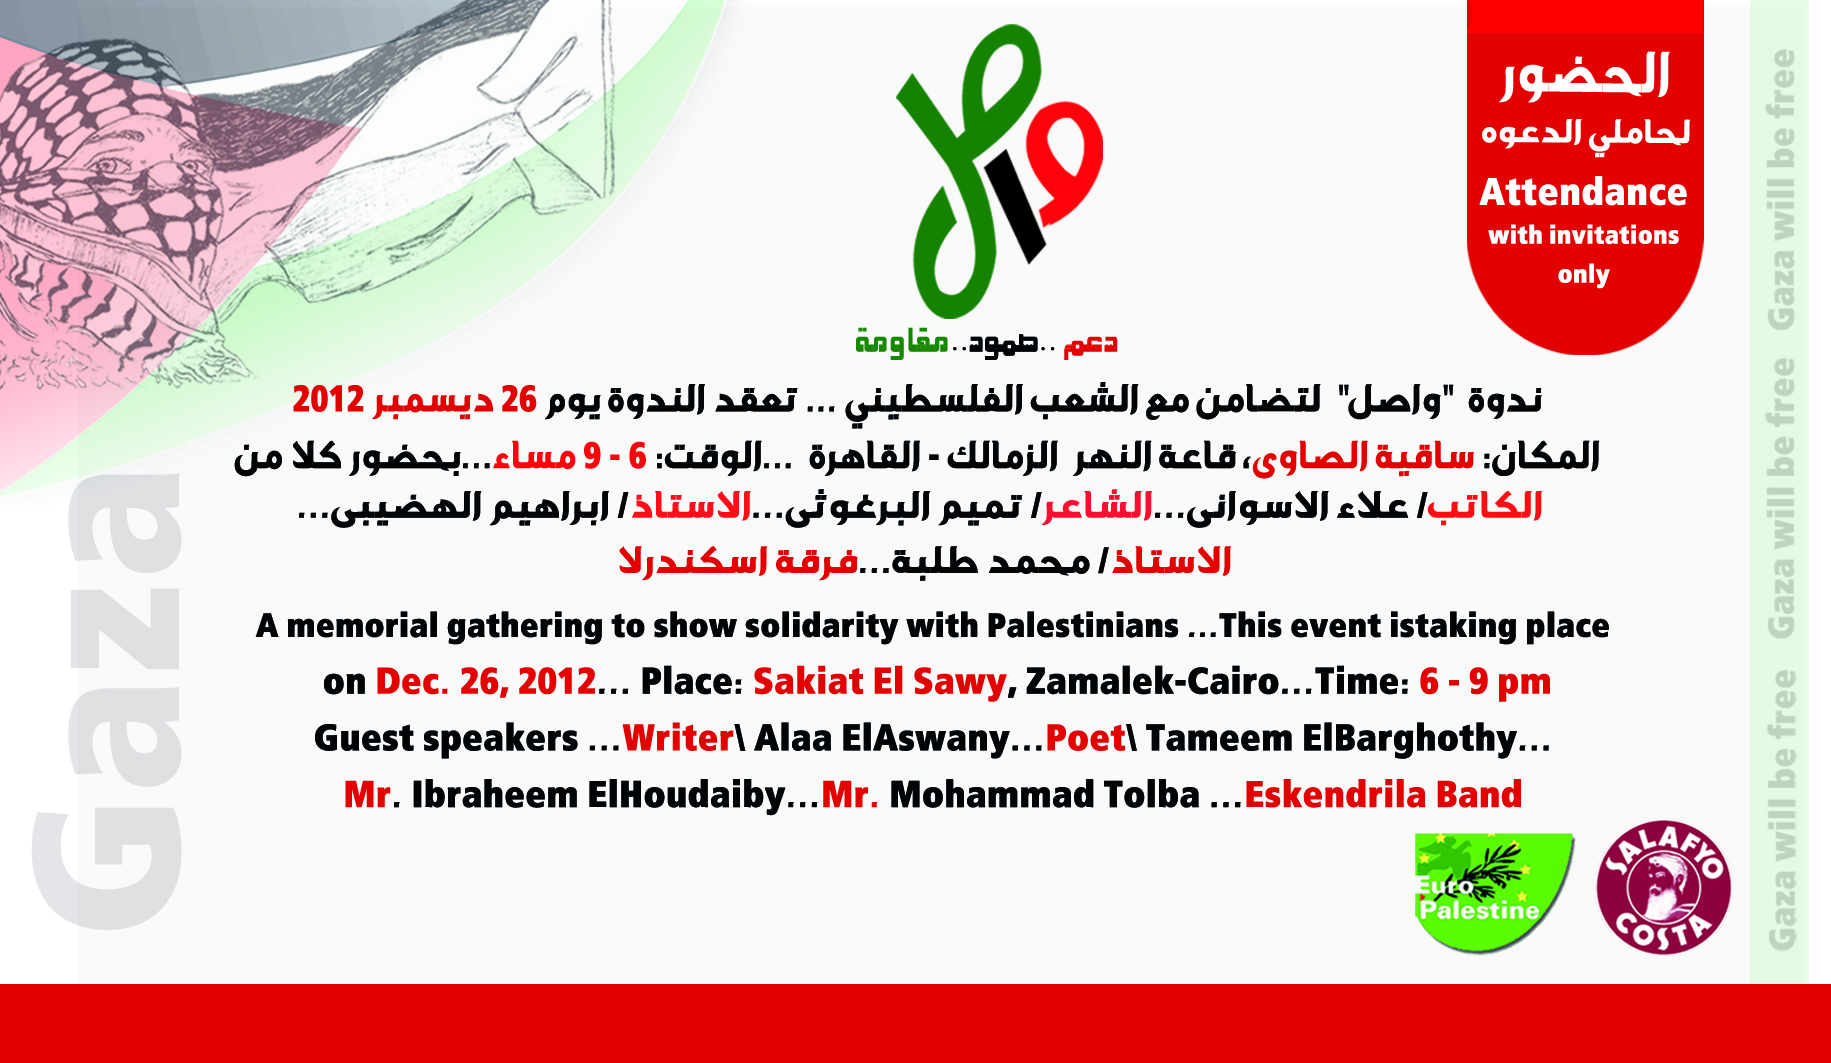 le_caire_invitation_meeting_concert-2.jpg